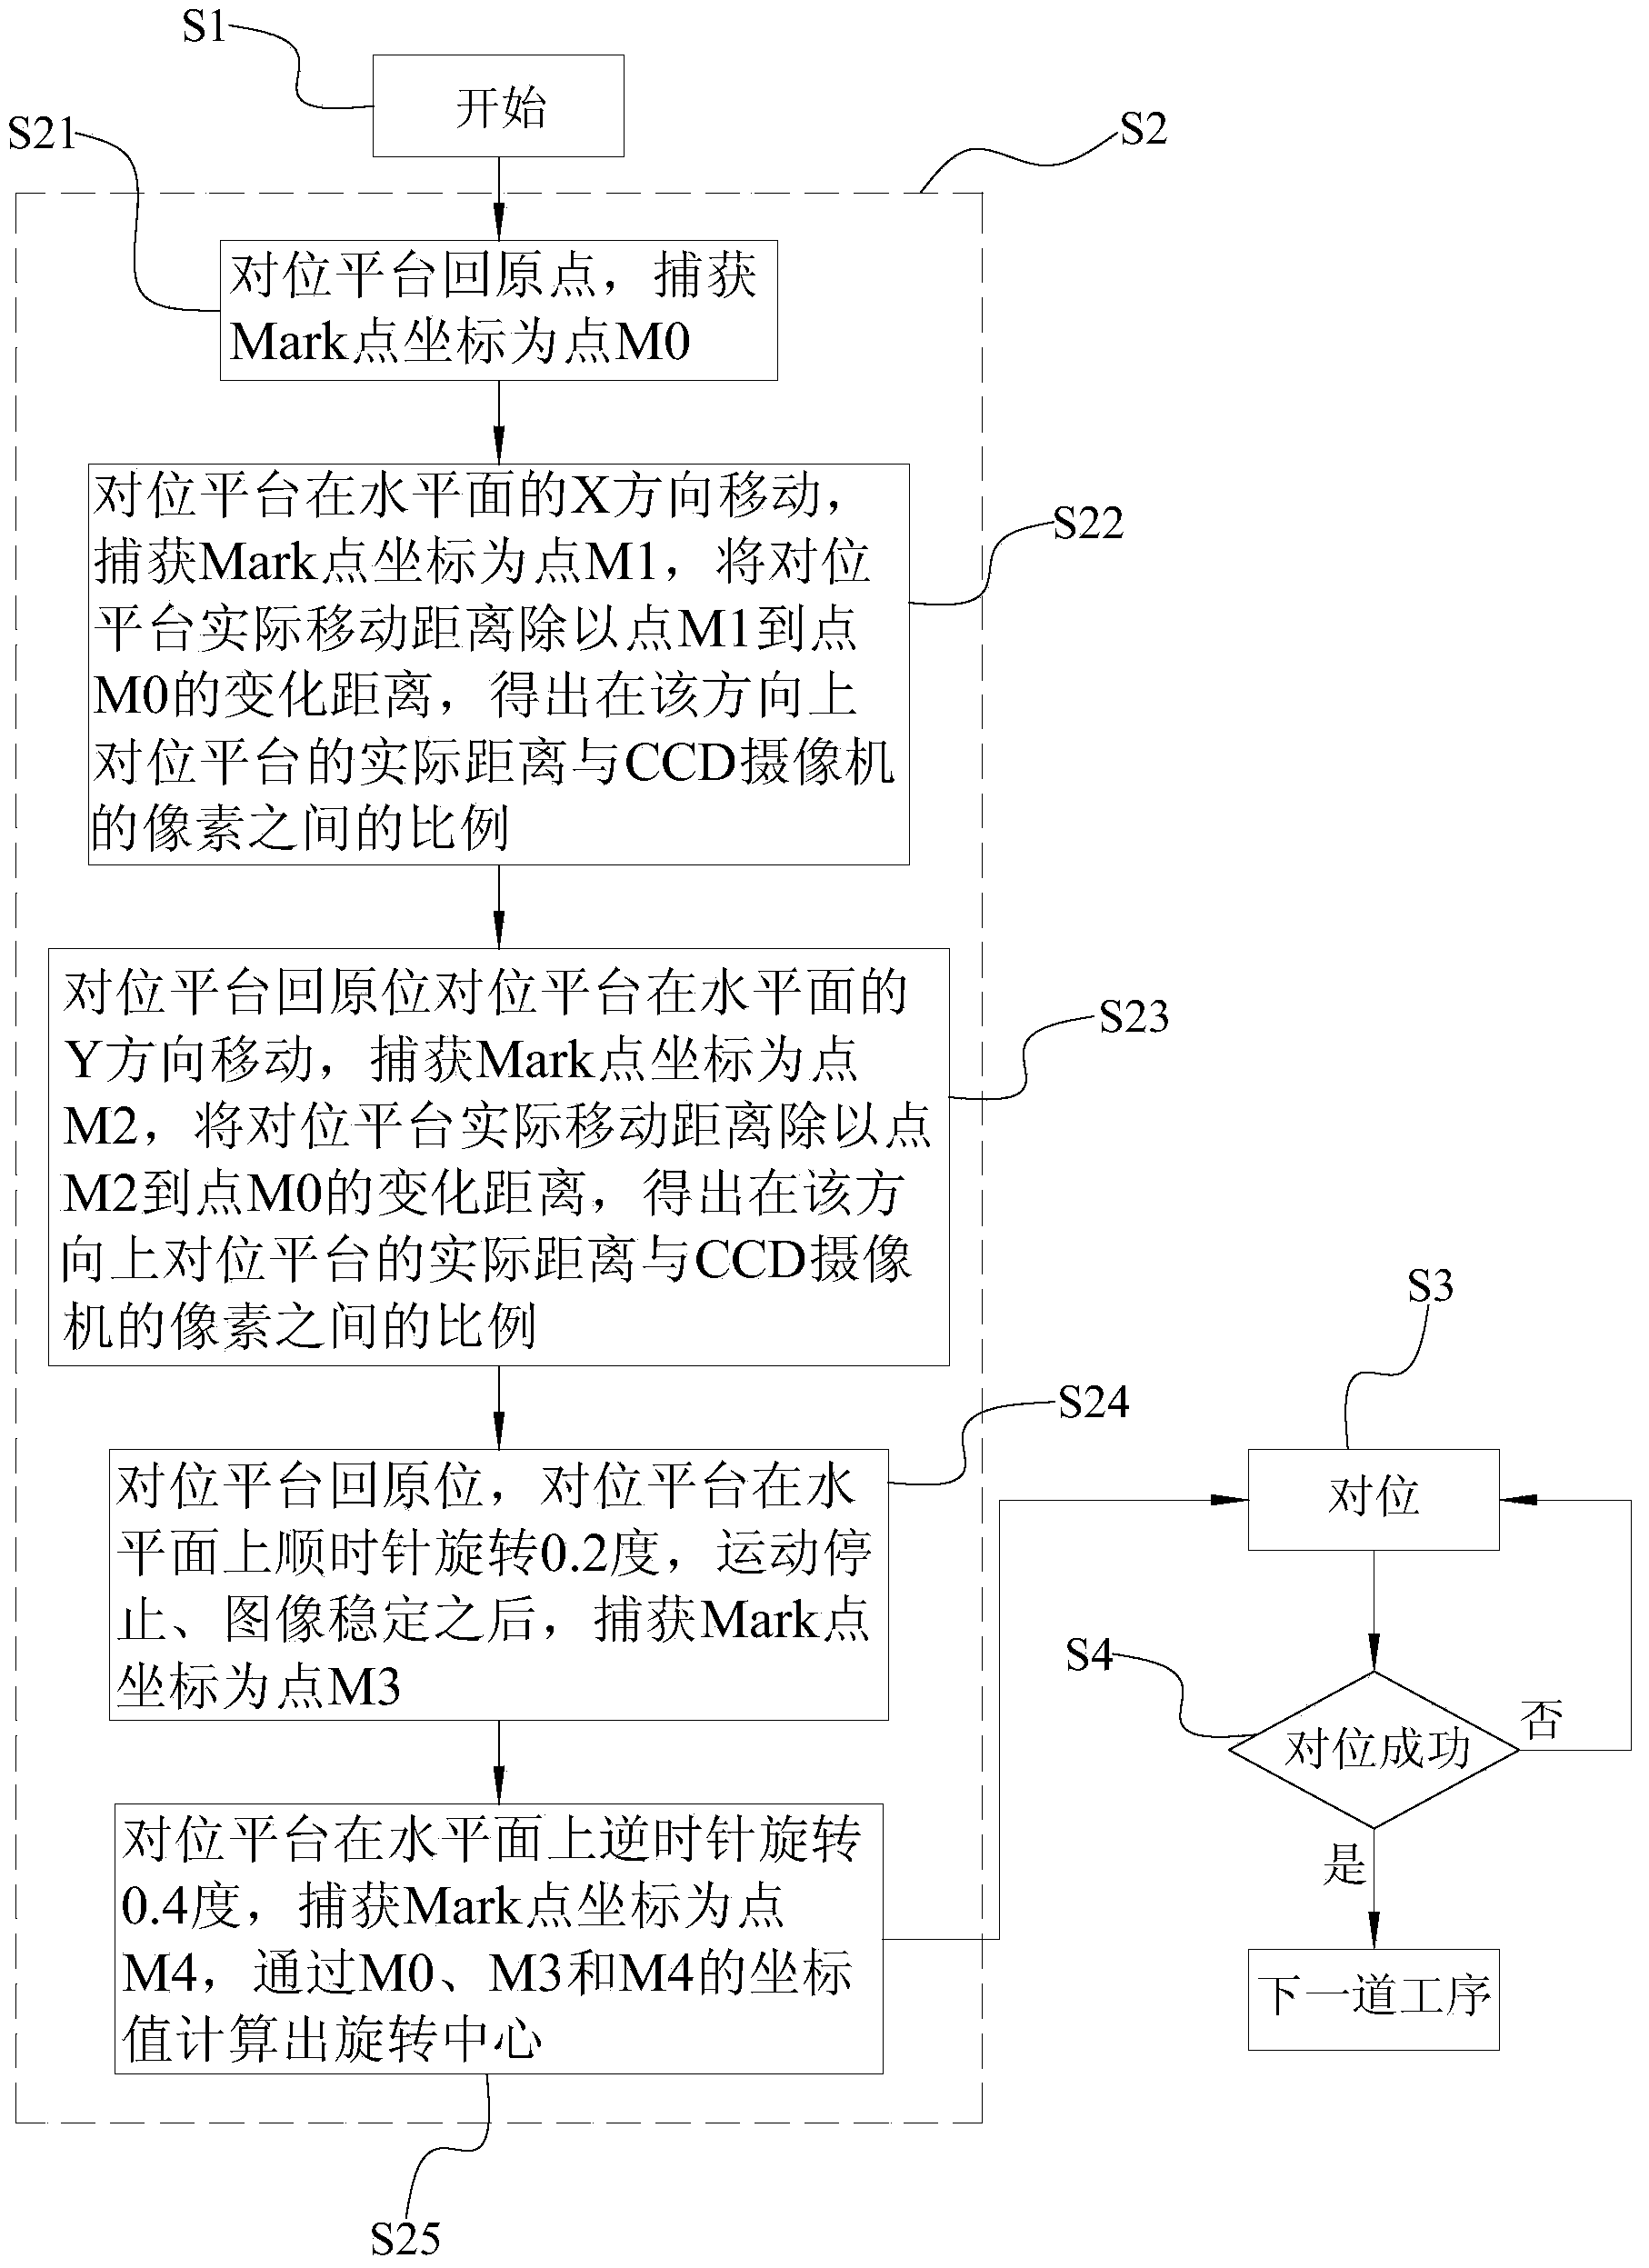 Calibrating and aligning method of CCD (Charge-coupled Device) camera